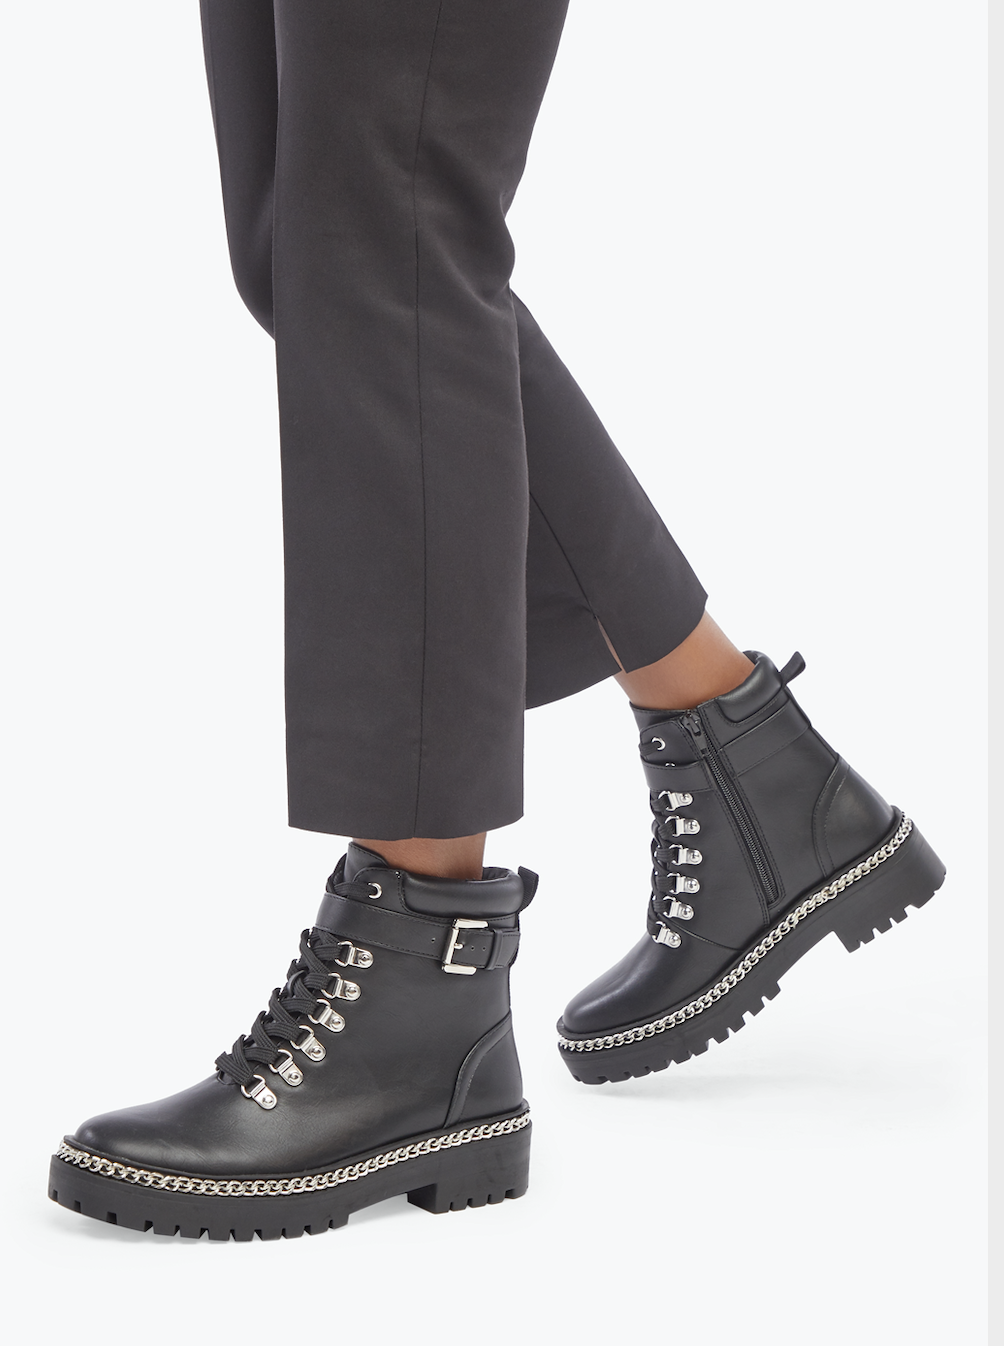 2020 Boot Trends : Put your best foot forward with JustFab boots - The ...